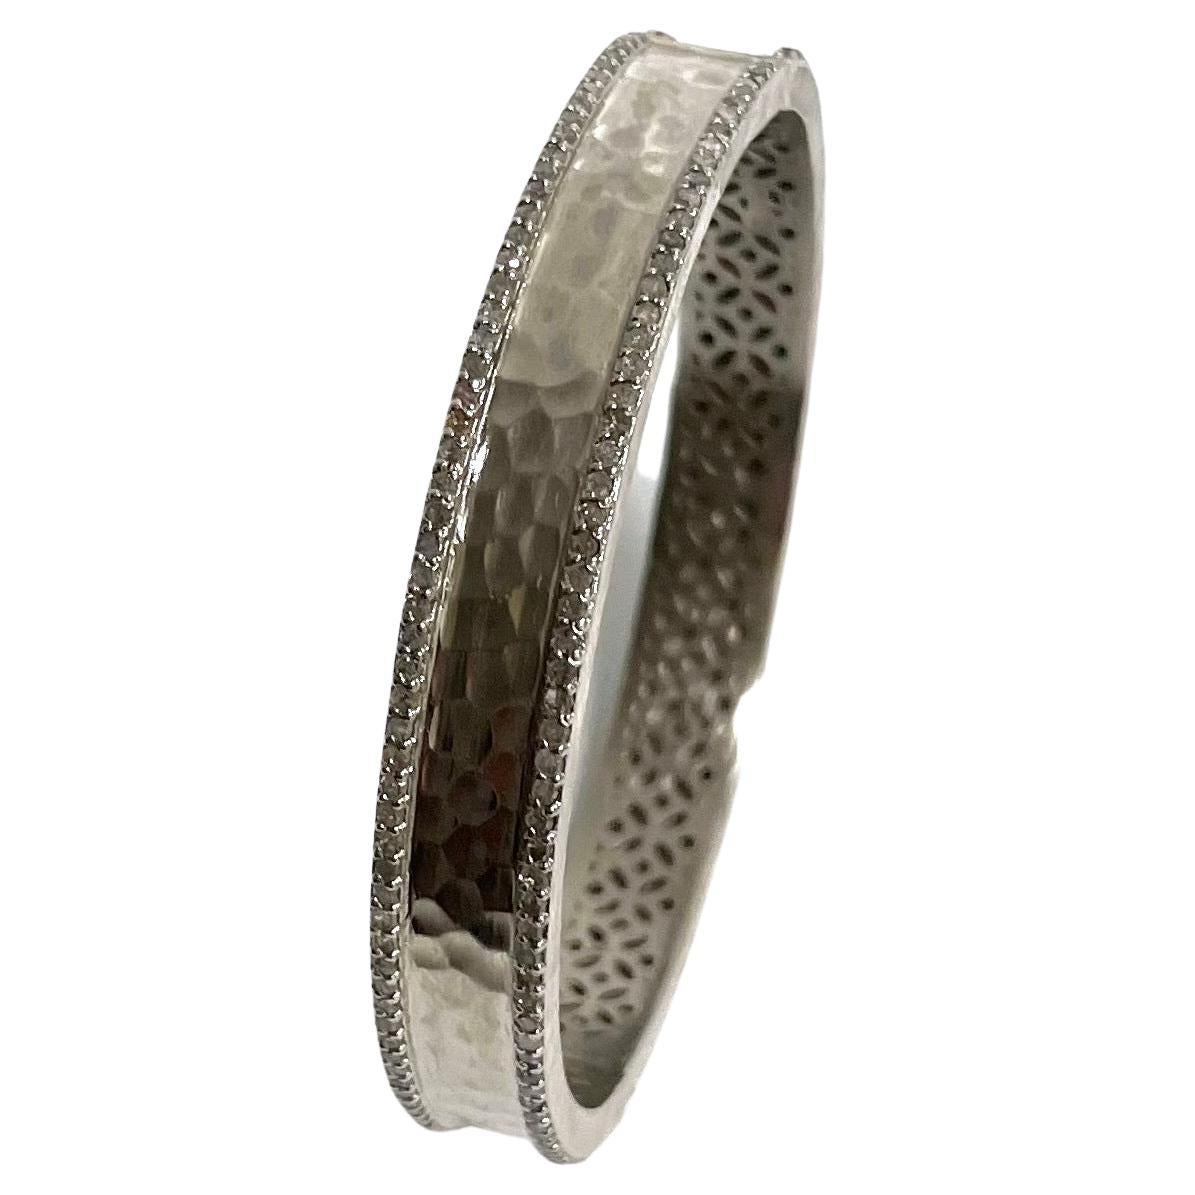  Hammered Rhodium-Plated Silver Bangle with Diamonds Paradizia Bracelet For Sale 1